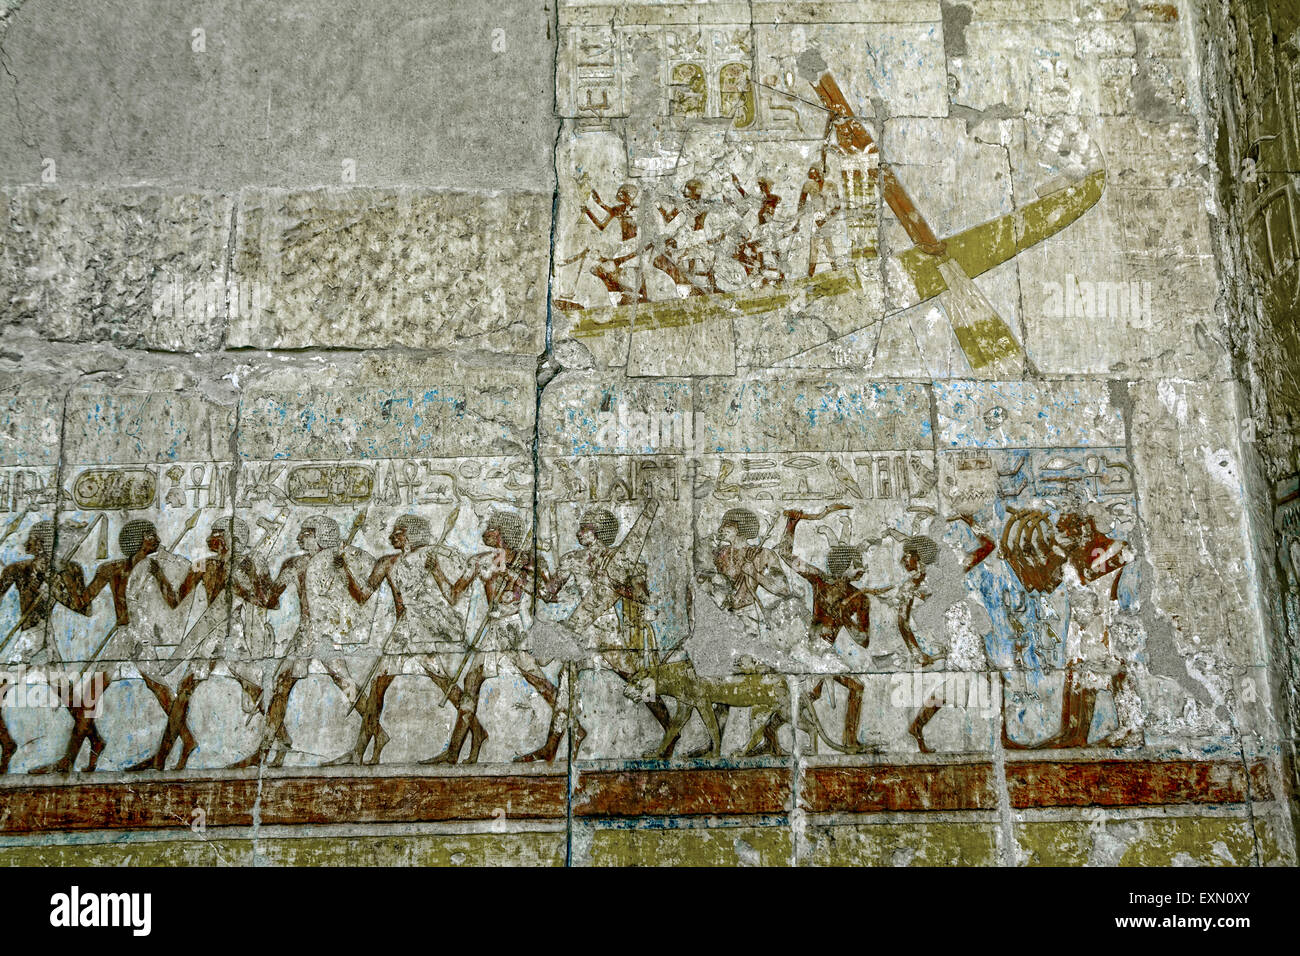 Ancient paintings on the walls inside the temple of Hatshepsut in Luxor Egypt. Stock Photo